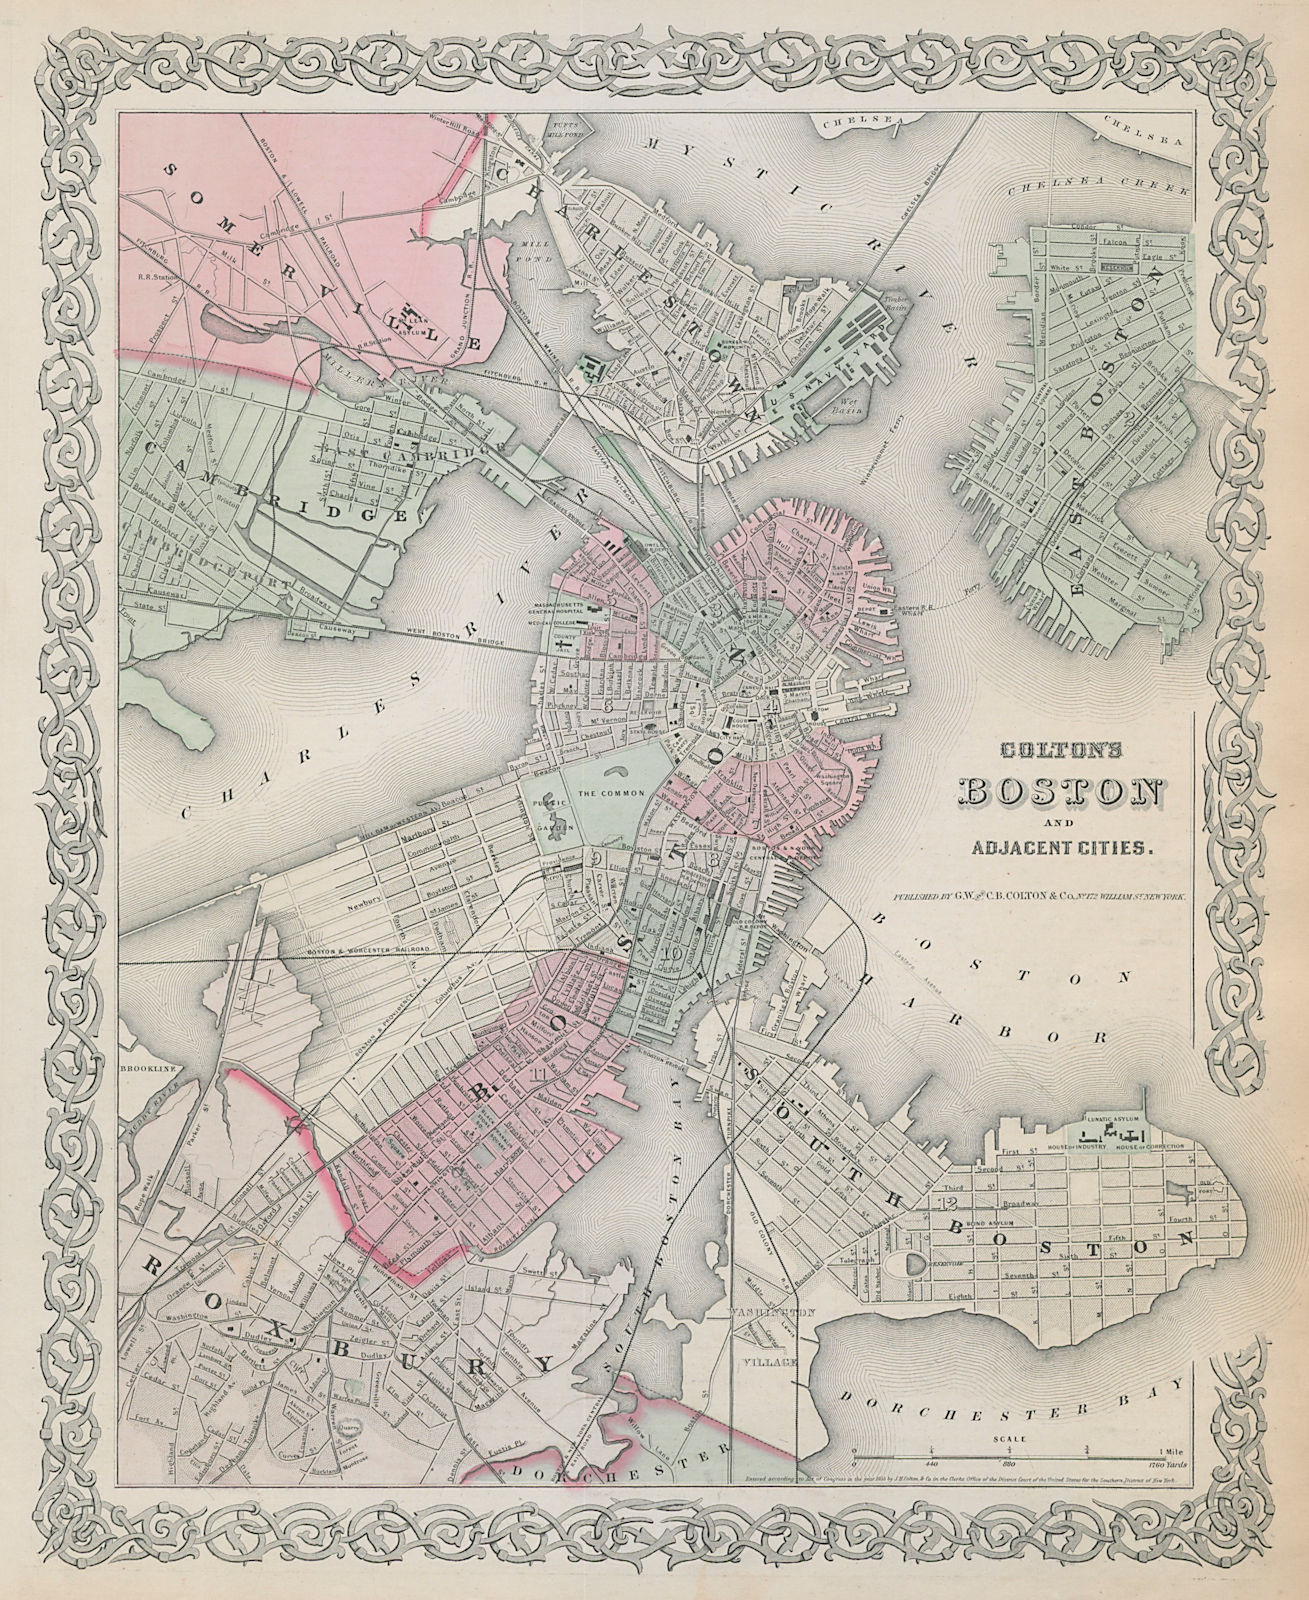 Associate Product Boston and adjacent cities. Decorative antique town city plan. COLTON 1869 map